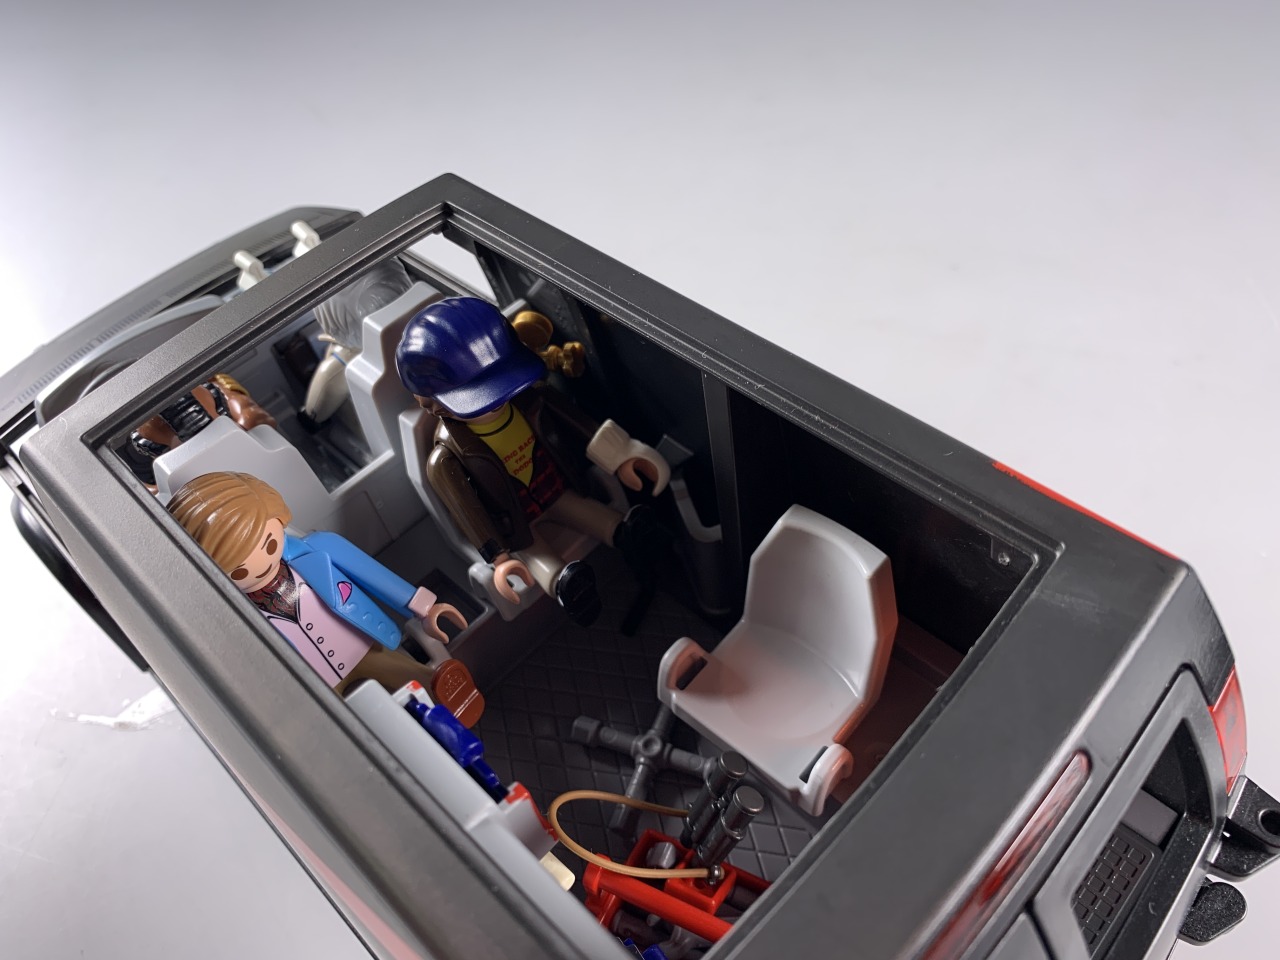 ANDY'S AWESOME TOYBOX — A-Team Van and Figures. Playmobil. 2021